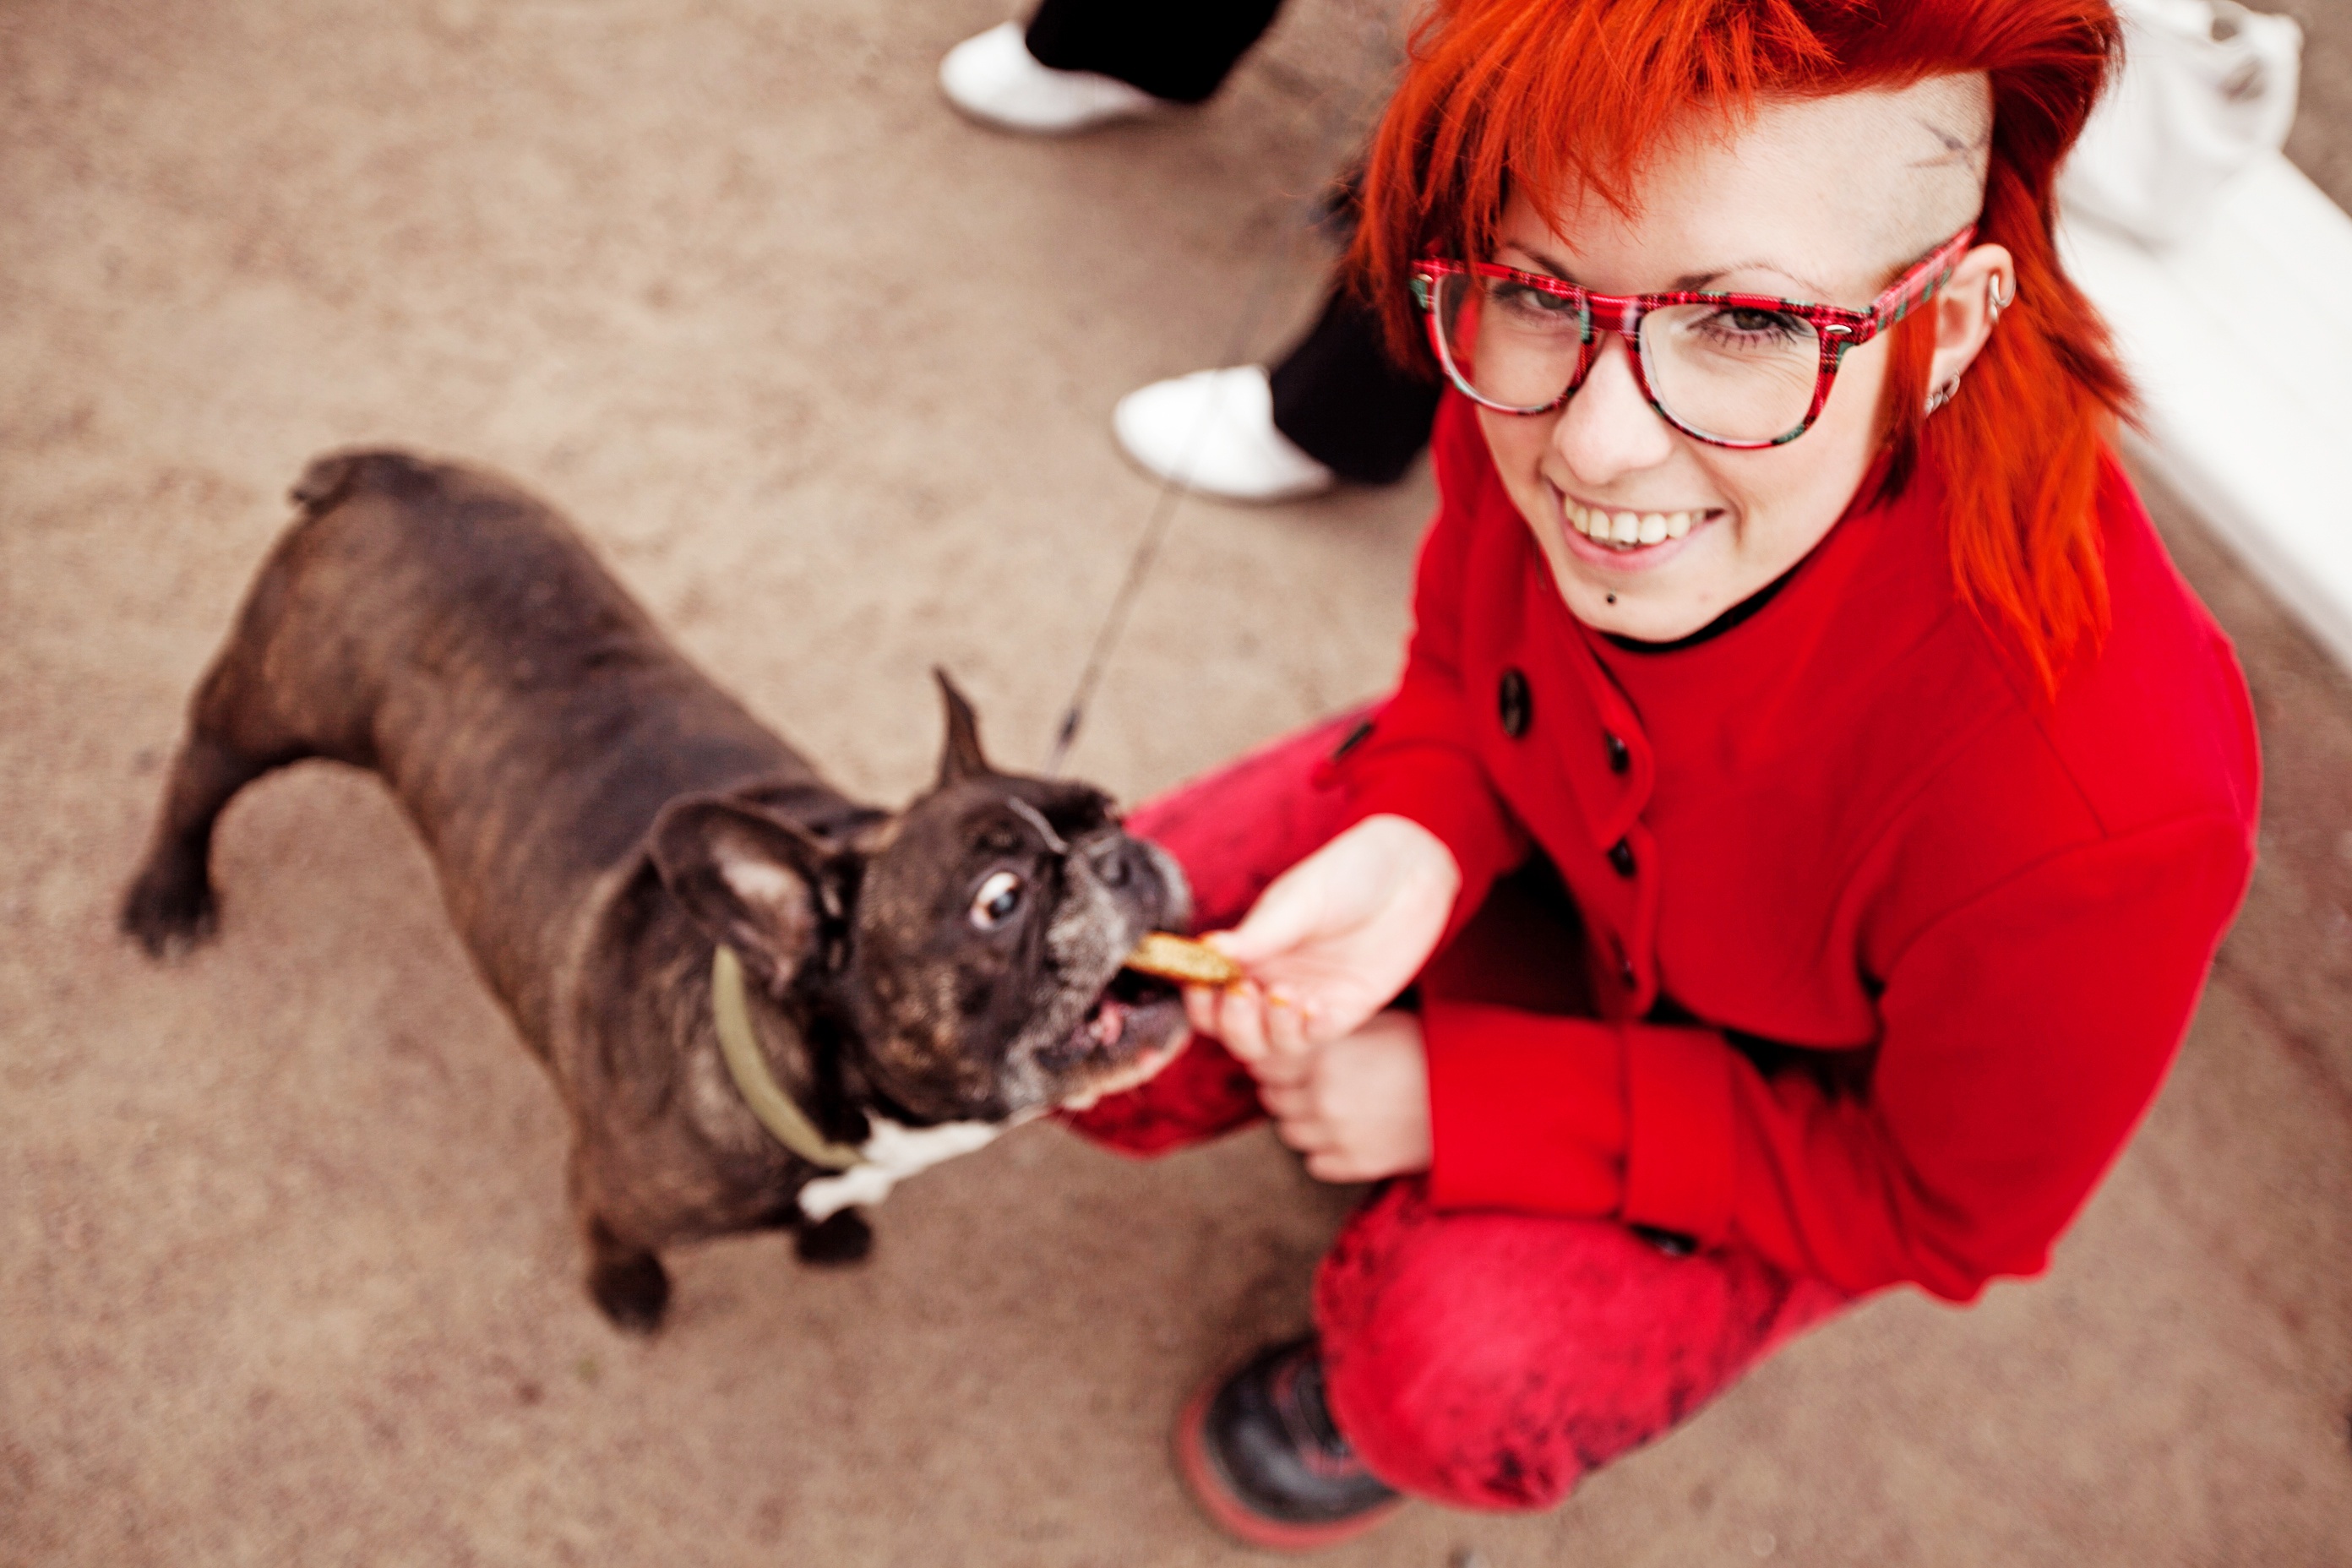 Be real, like this lady feeding fries to a frenchie.